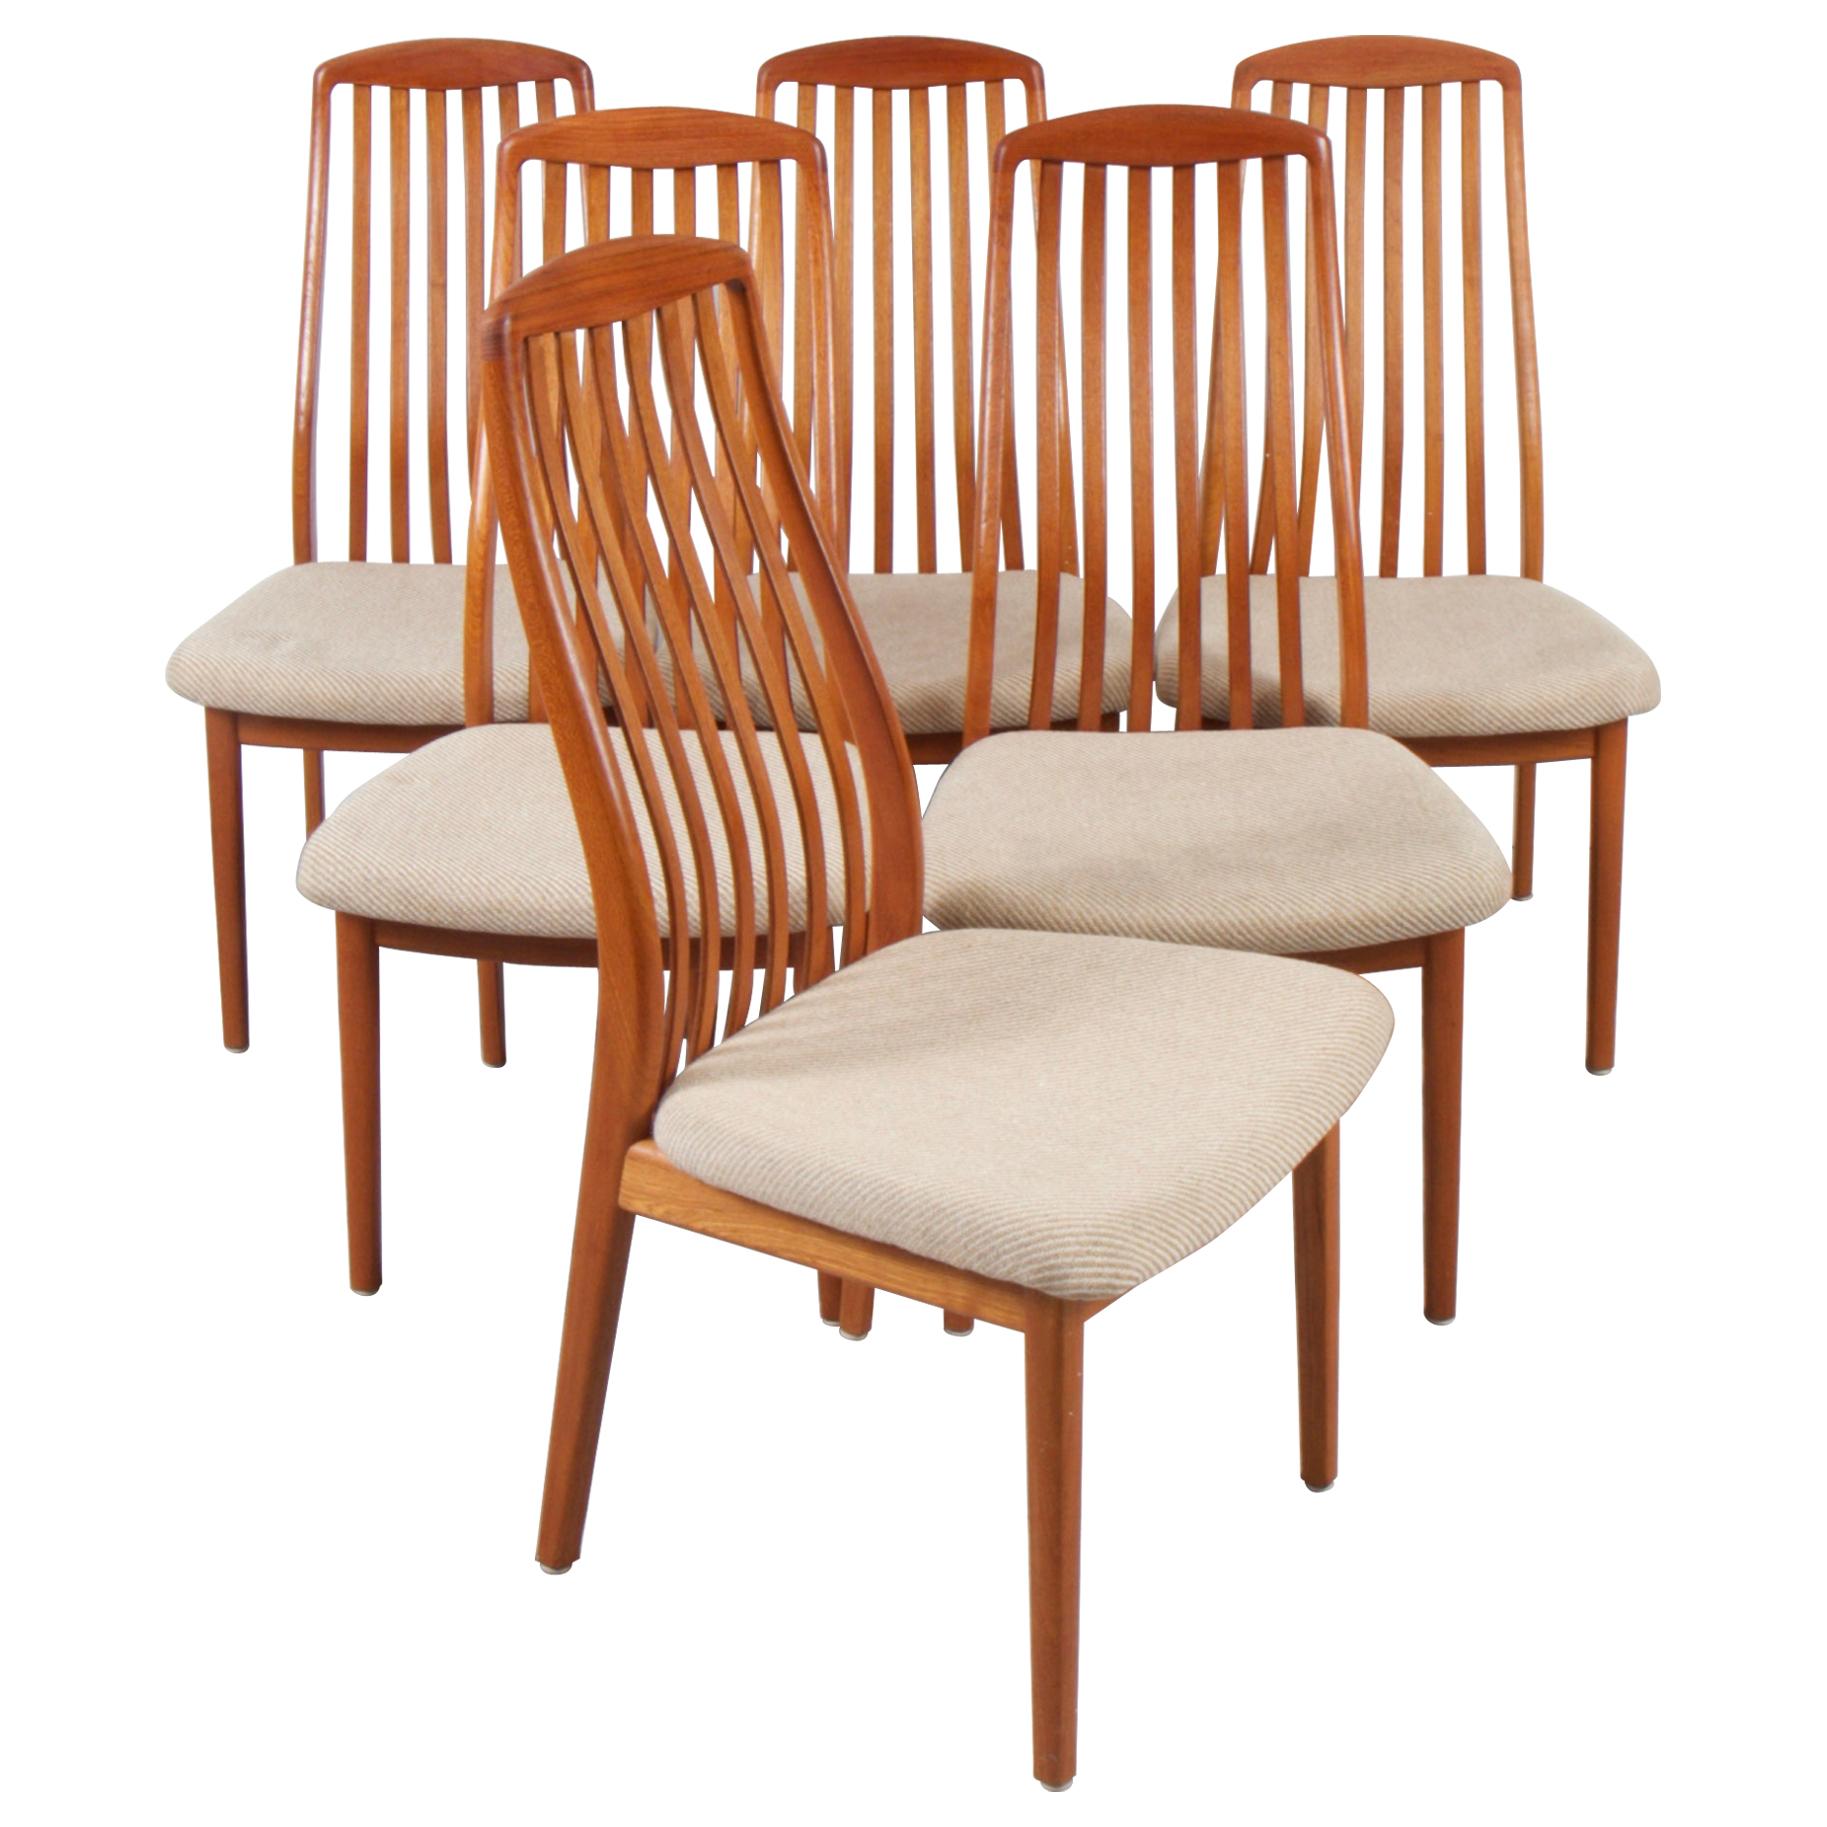 Benny Linden Teak Dining Chairs For Sale